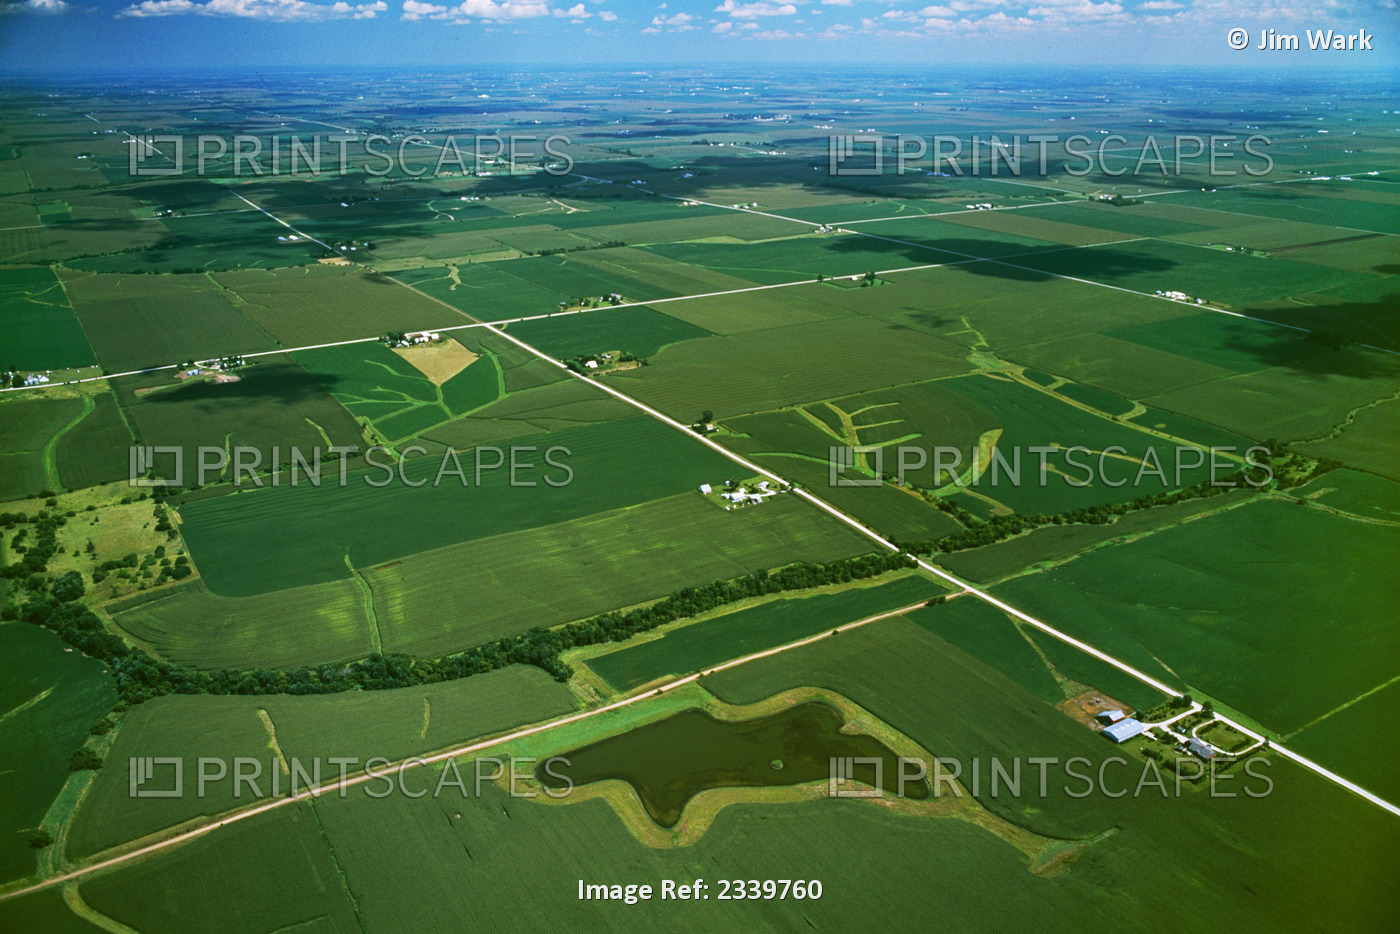 Agriculture - Aerial view of farmsteads and agricultural fields with grassy ...